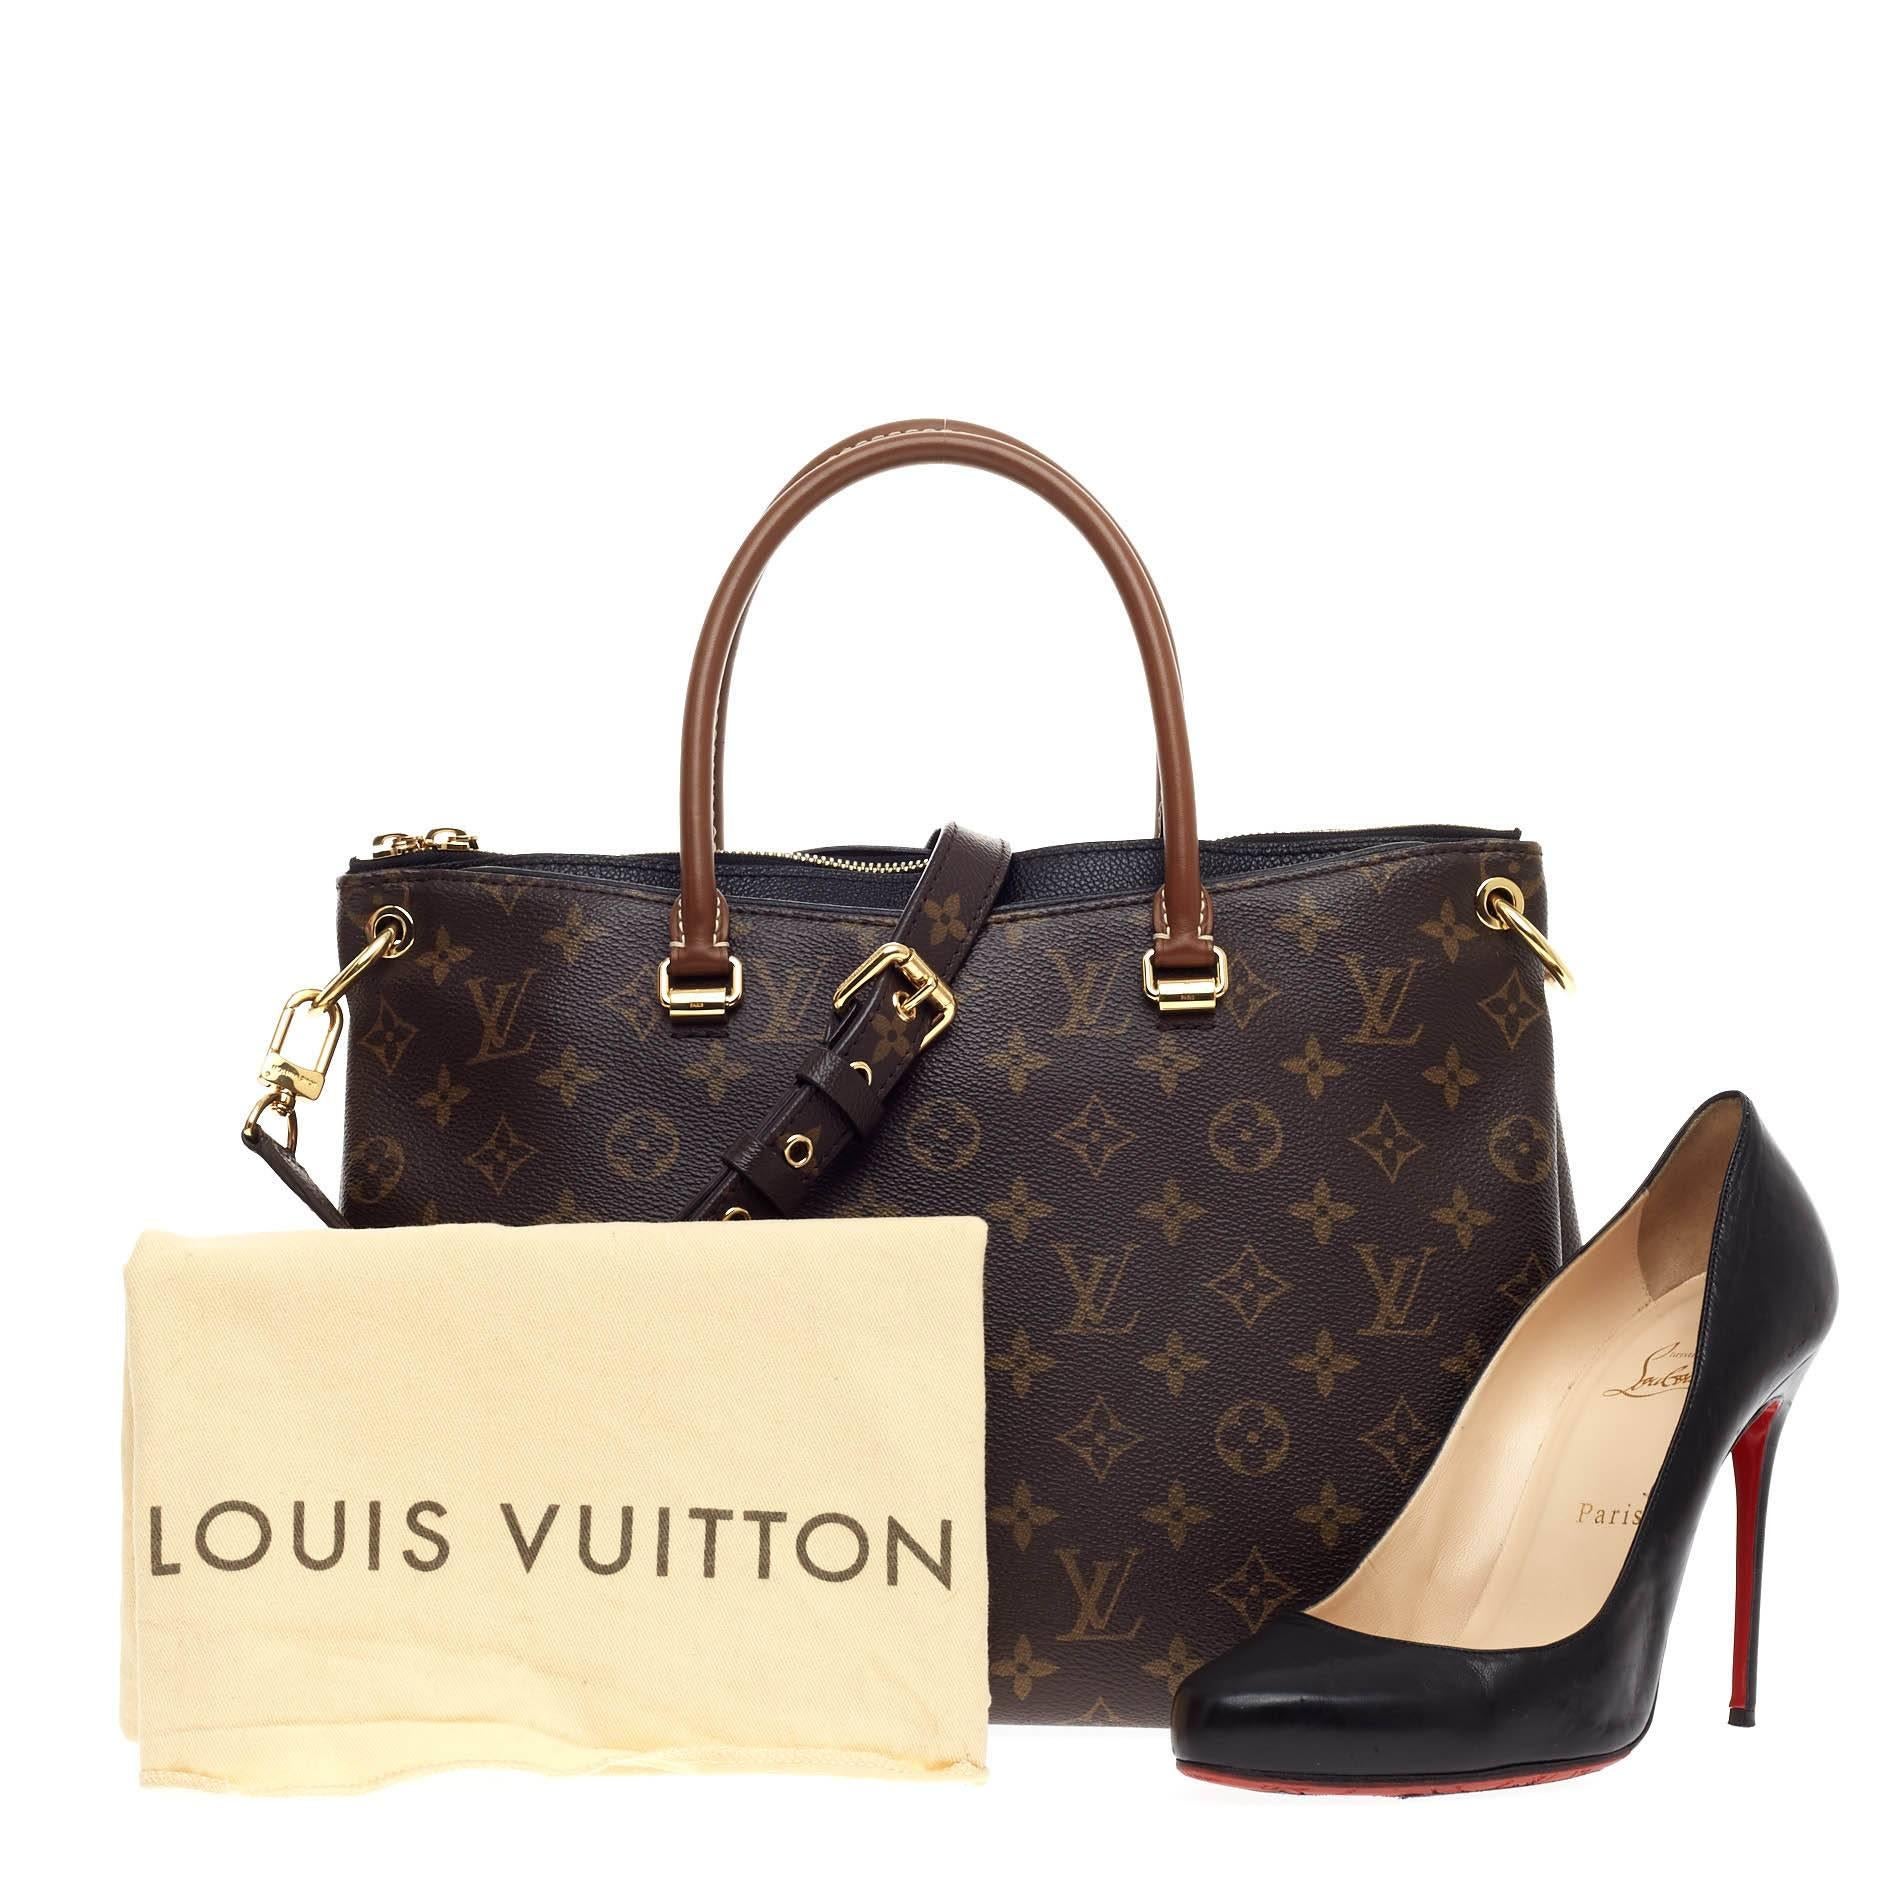 This authentic Louis Vuitton Pallas Tote Monogram Canvas is a mix of classic style with modern functionality. Released first in 2011, this structured satchel features the brand's signature monogram canvas print with peeking noir black calfskin